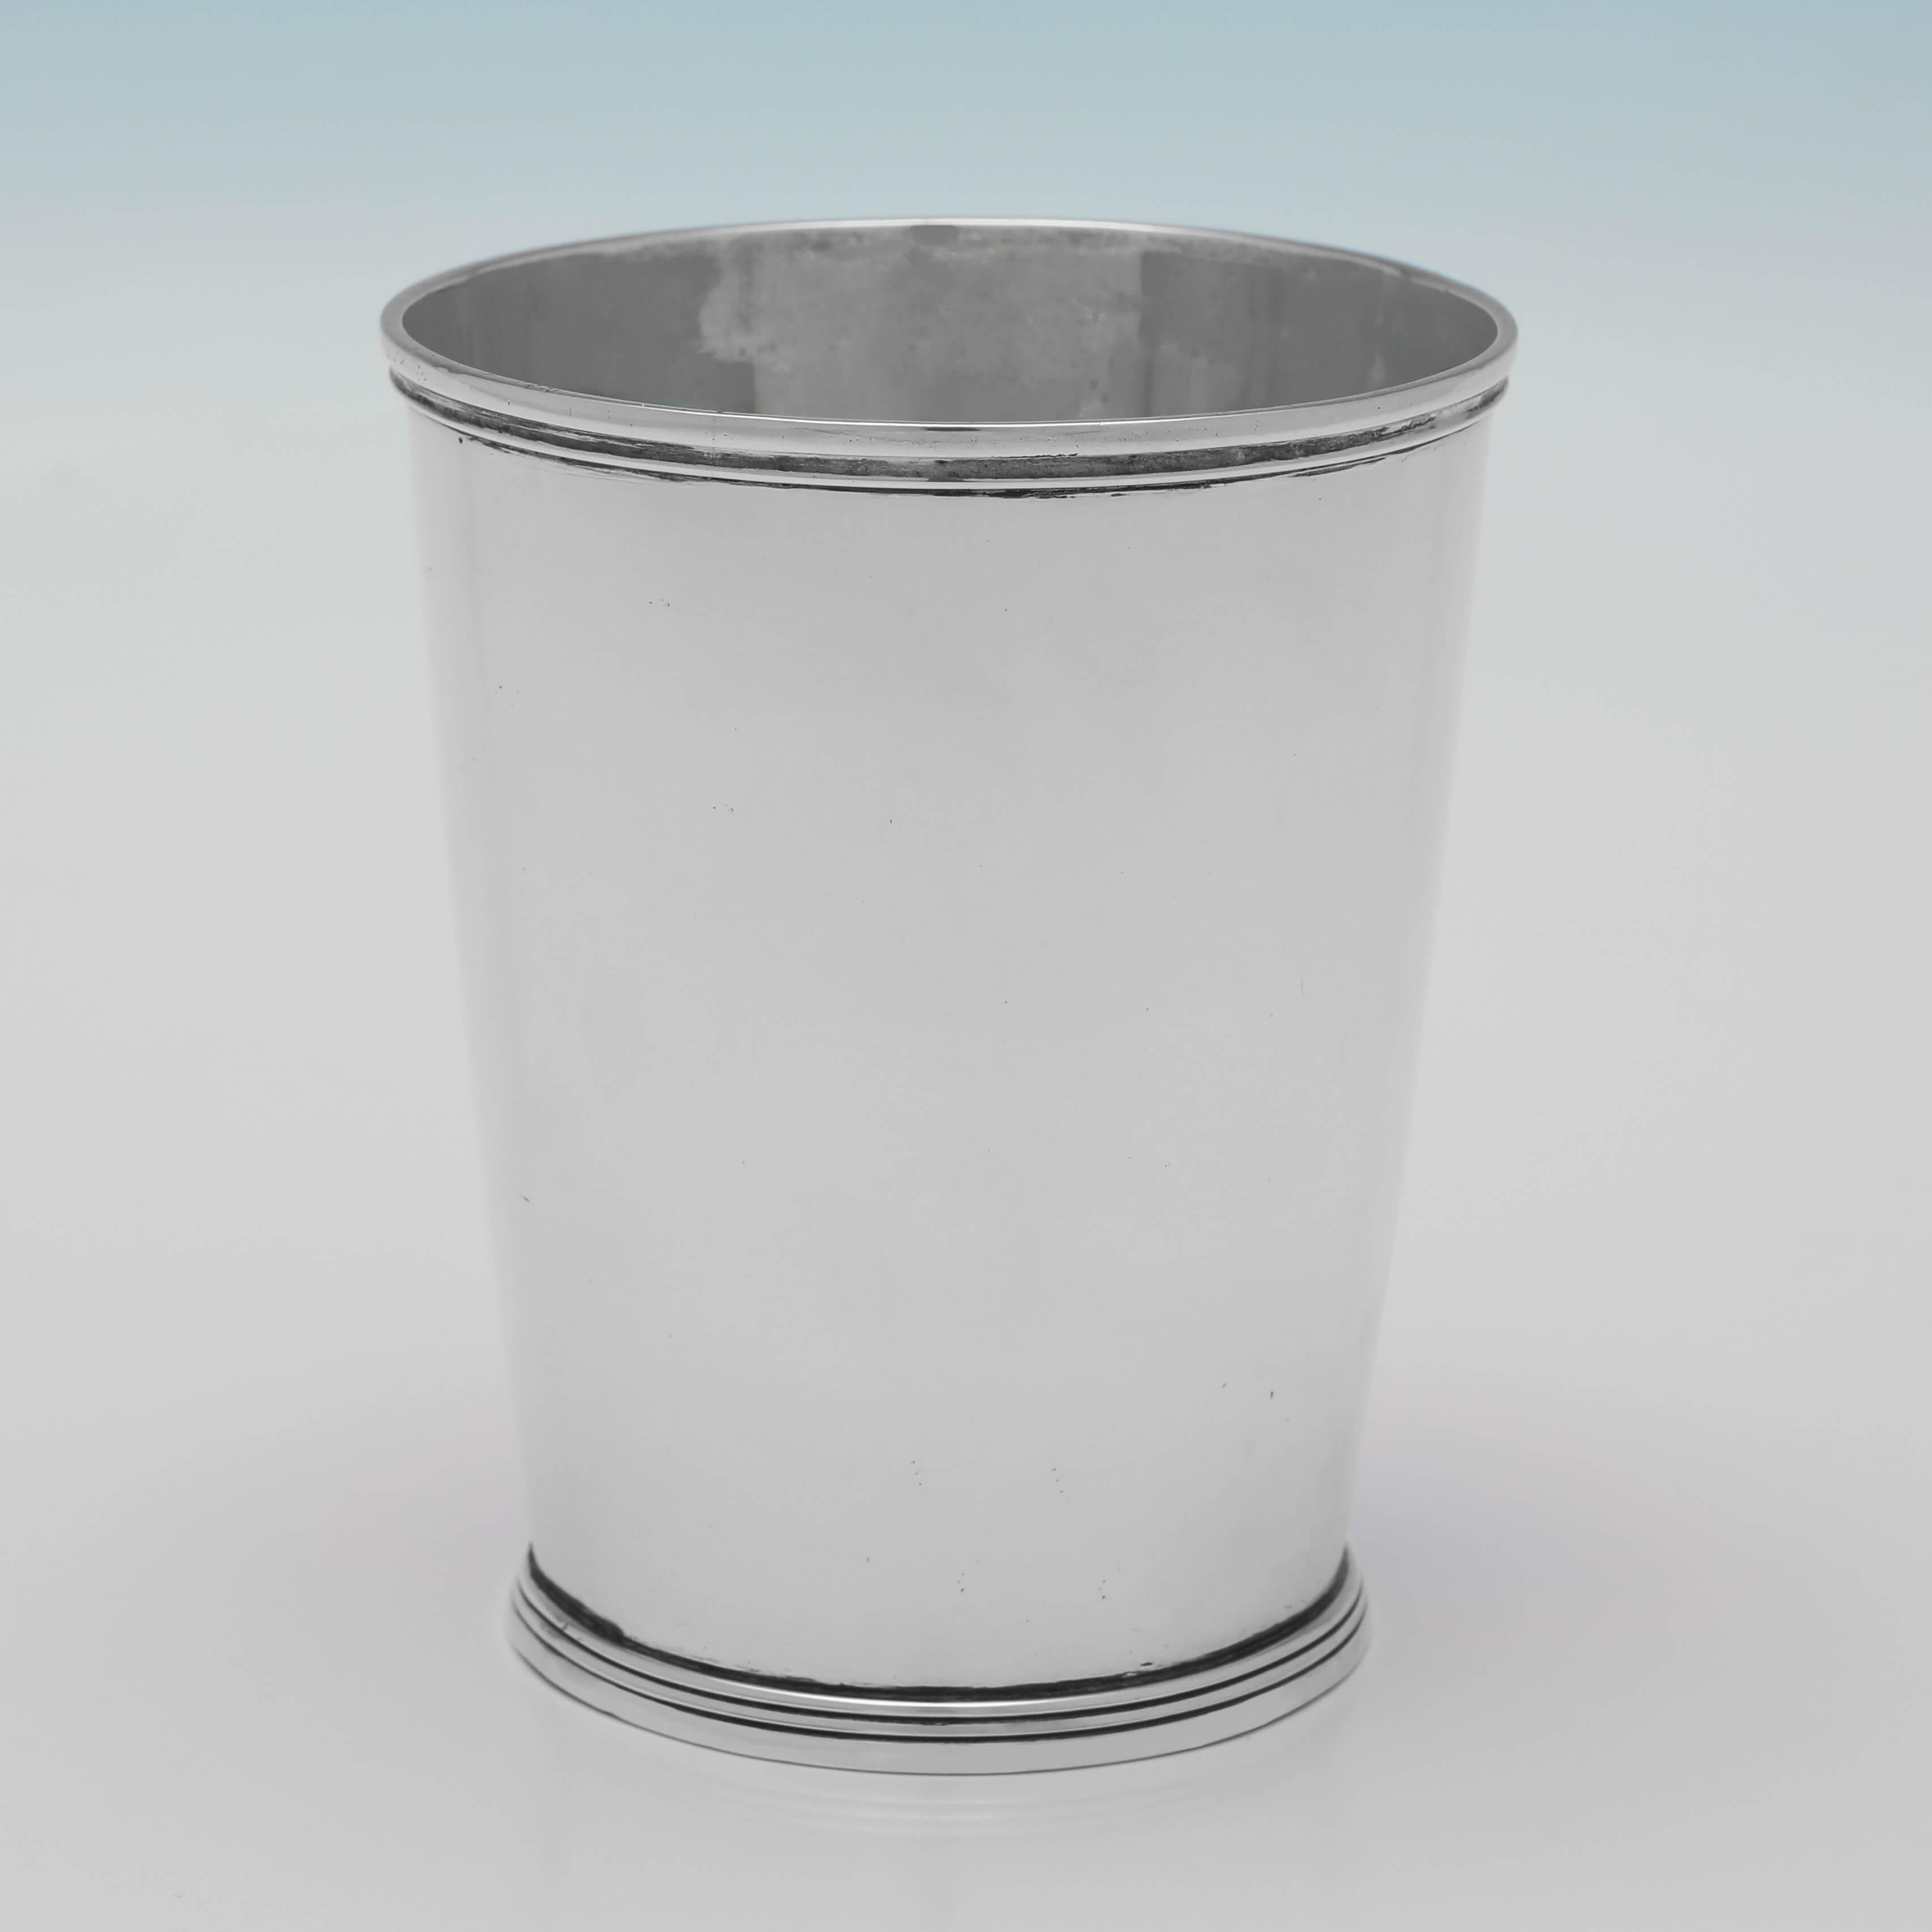 Hallmarked in London in 1805, this very handsome, George III period, Antique Sterling Silver Beaker, is plain in style, with reed borders around the rim and base. The beaker measures 3.5